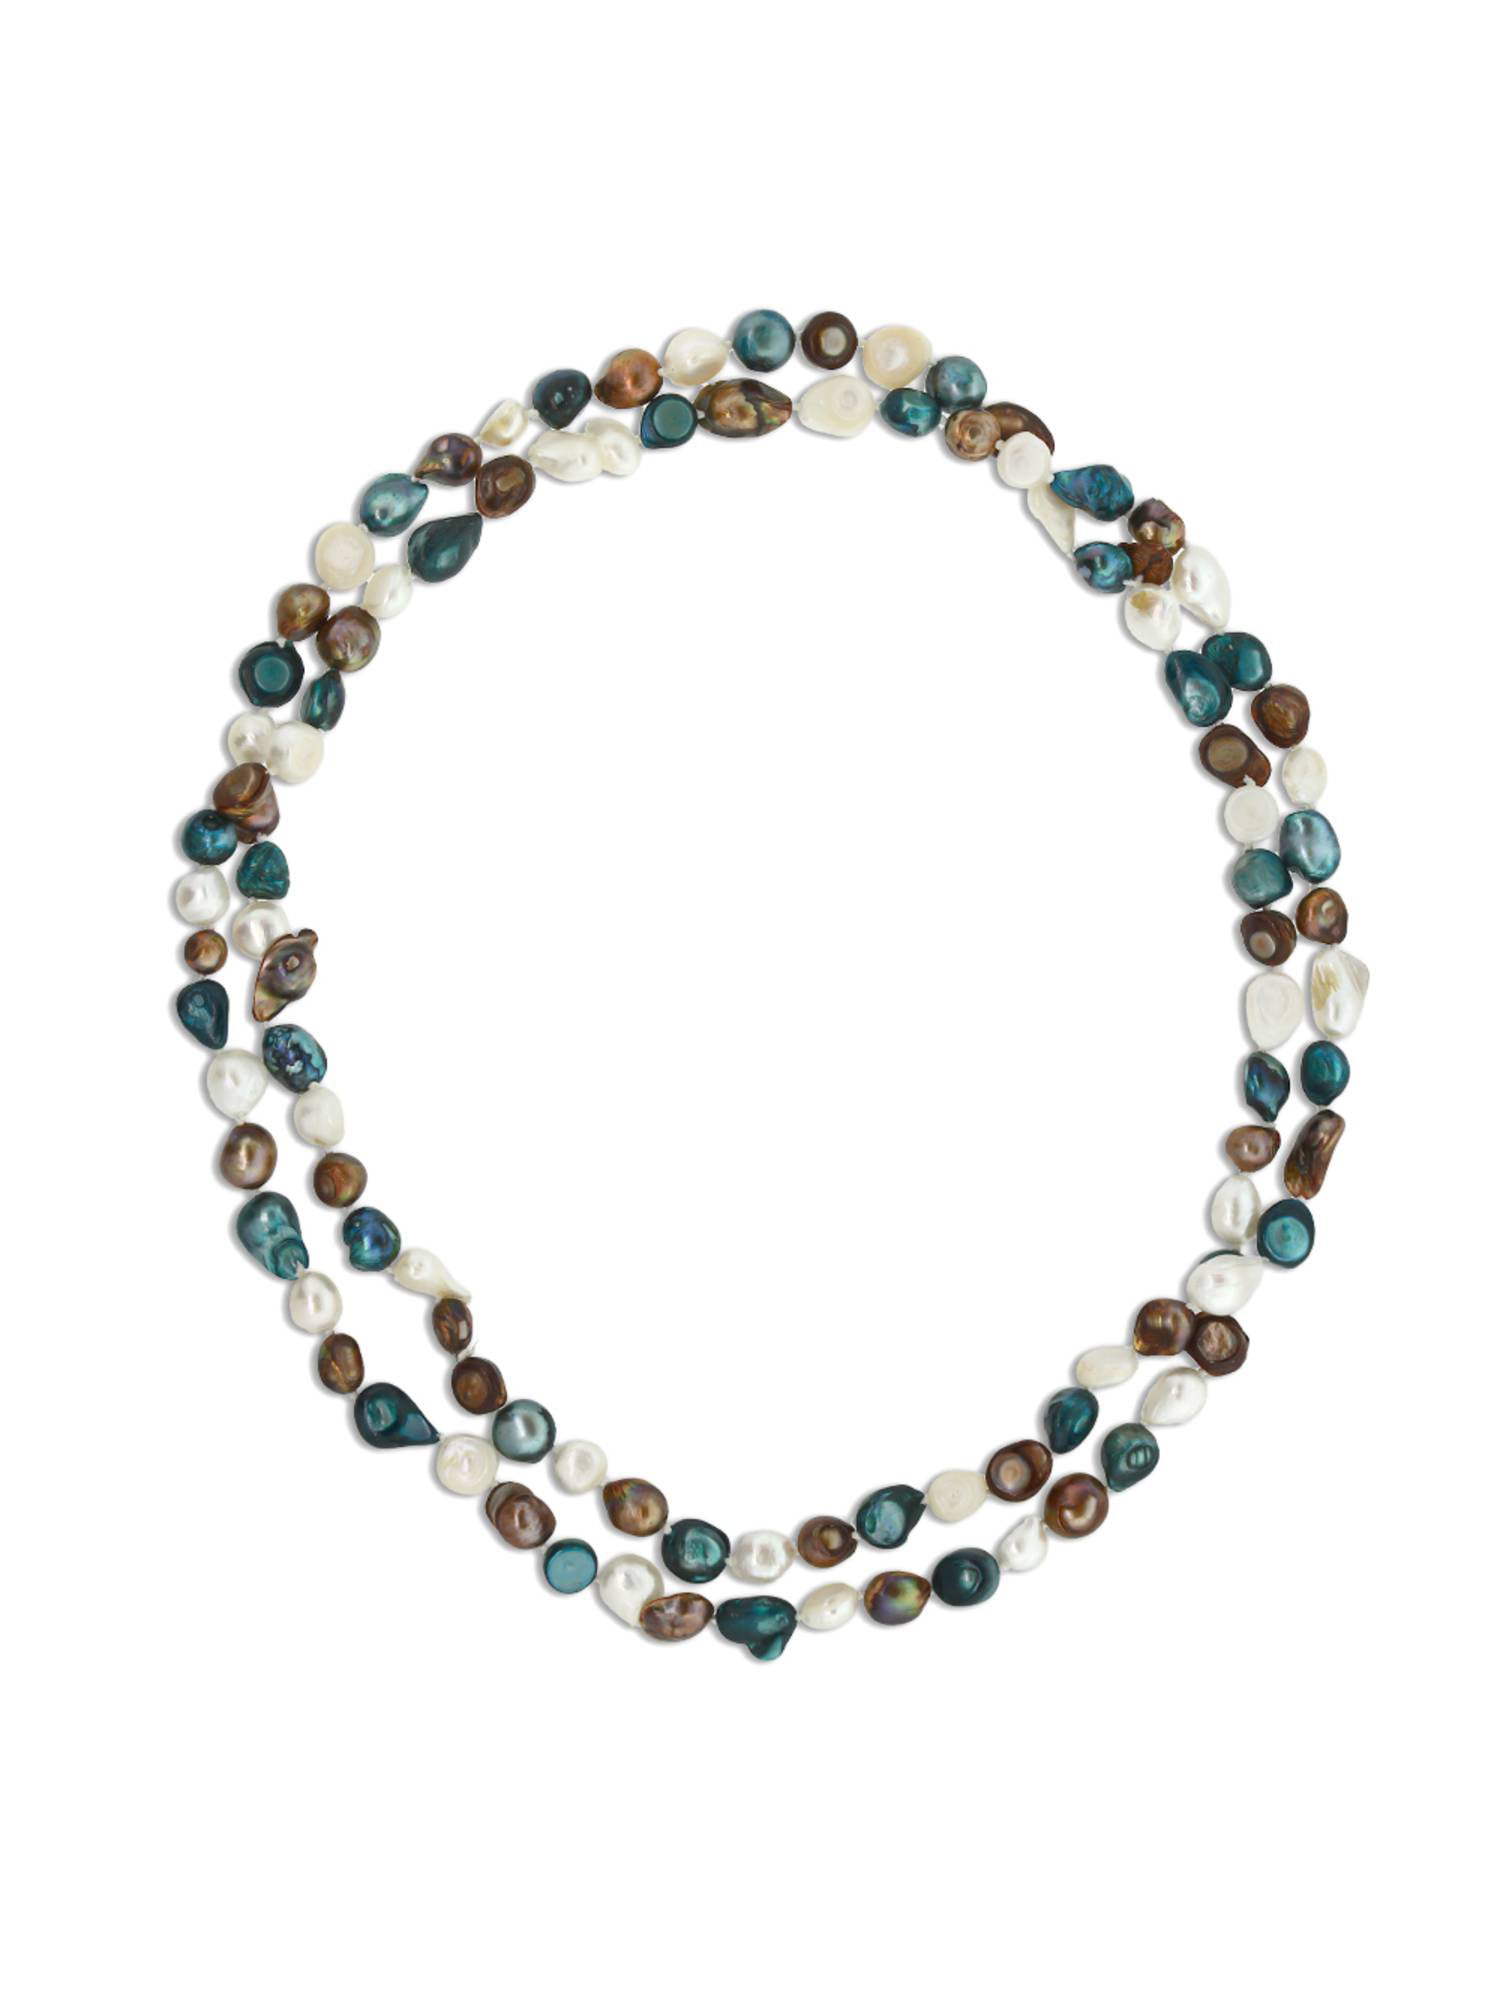 Gem Stone King Multi-Color Cultured Freshwater Pearl Necklace Earrings Bracelet Set 7-8MM 18inches